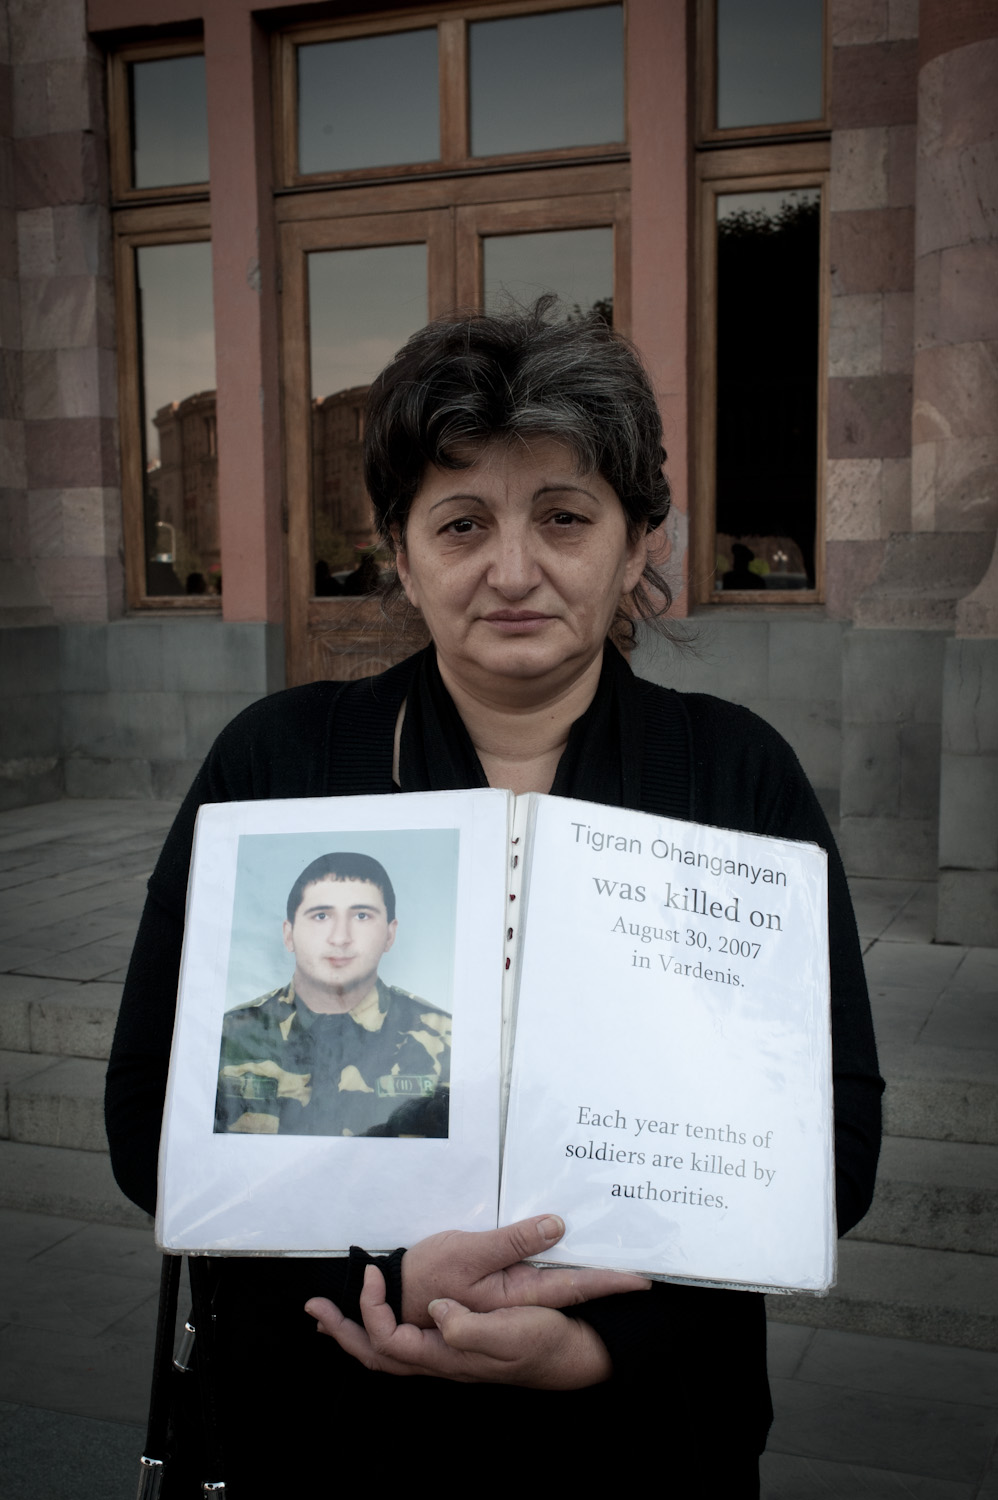  Gohar Ohanjayan's son Tigran died in 2007 while serving. During his last three months of service he complained that the commanders would hit him. The military says Tigran ran into a live wire and was electrocuted. The Ohanjanyan family believes thei